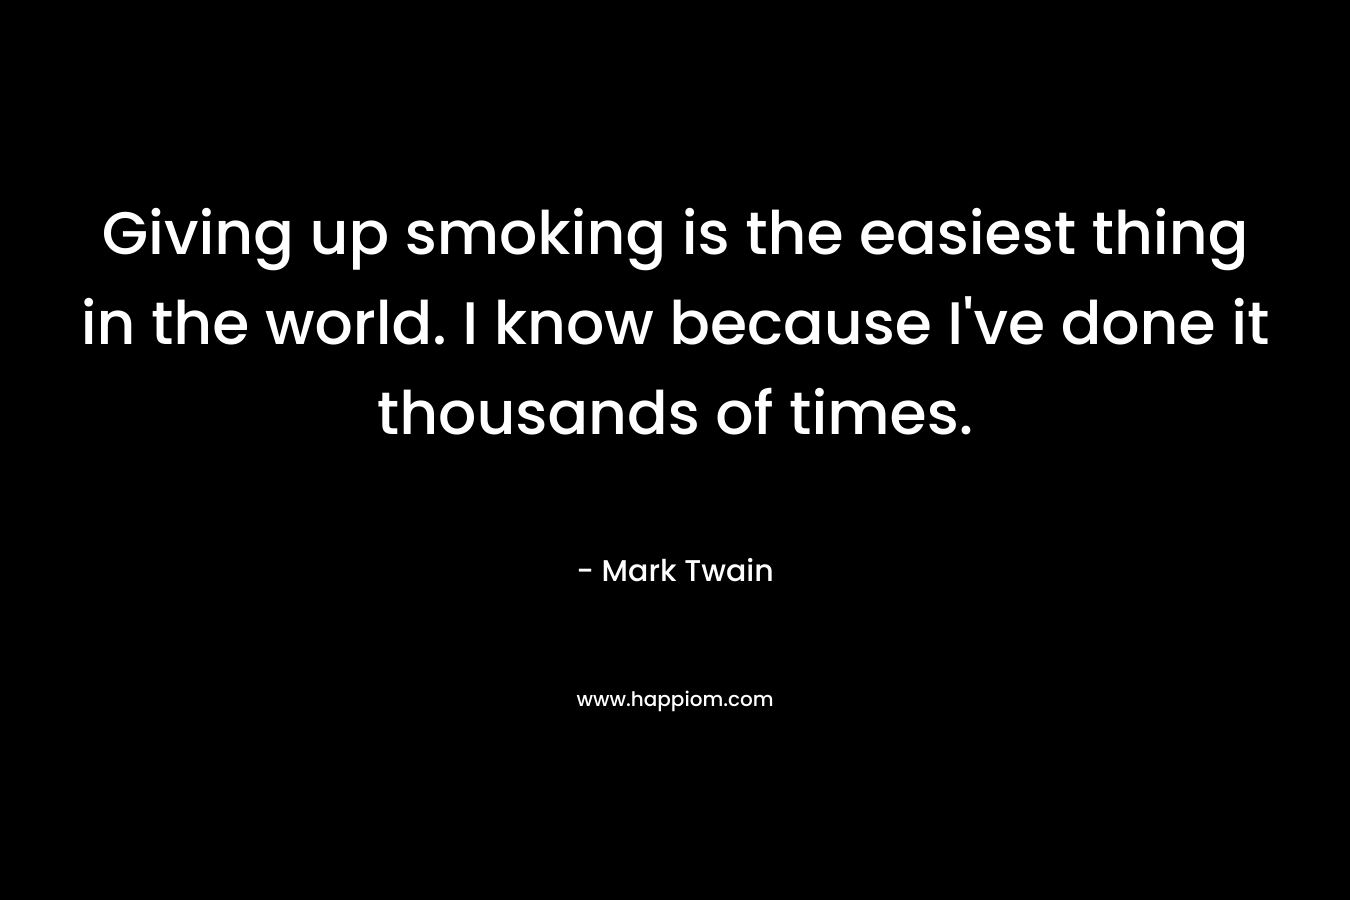 Giving up smoking is the easiest thing in the world. I know because I've done it thousands of times.